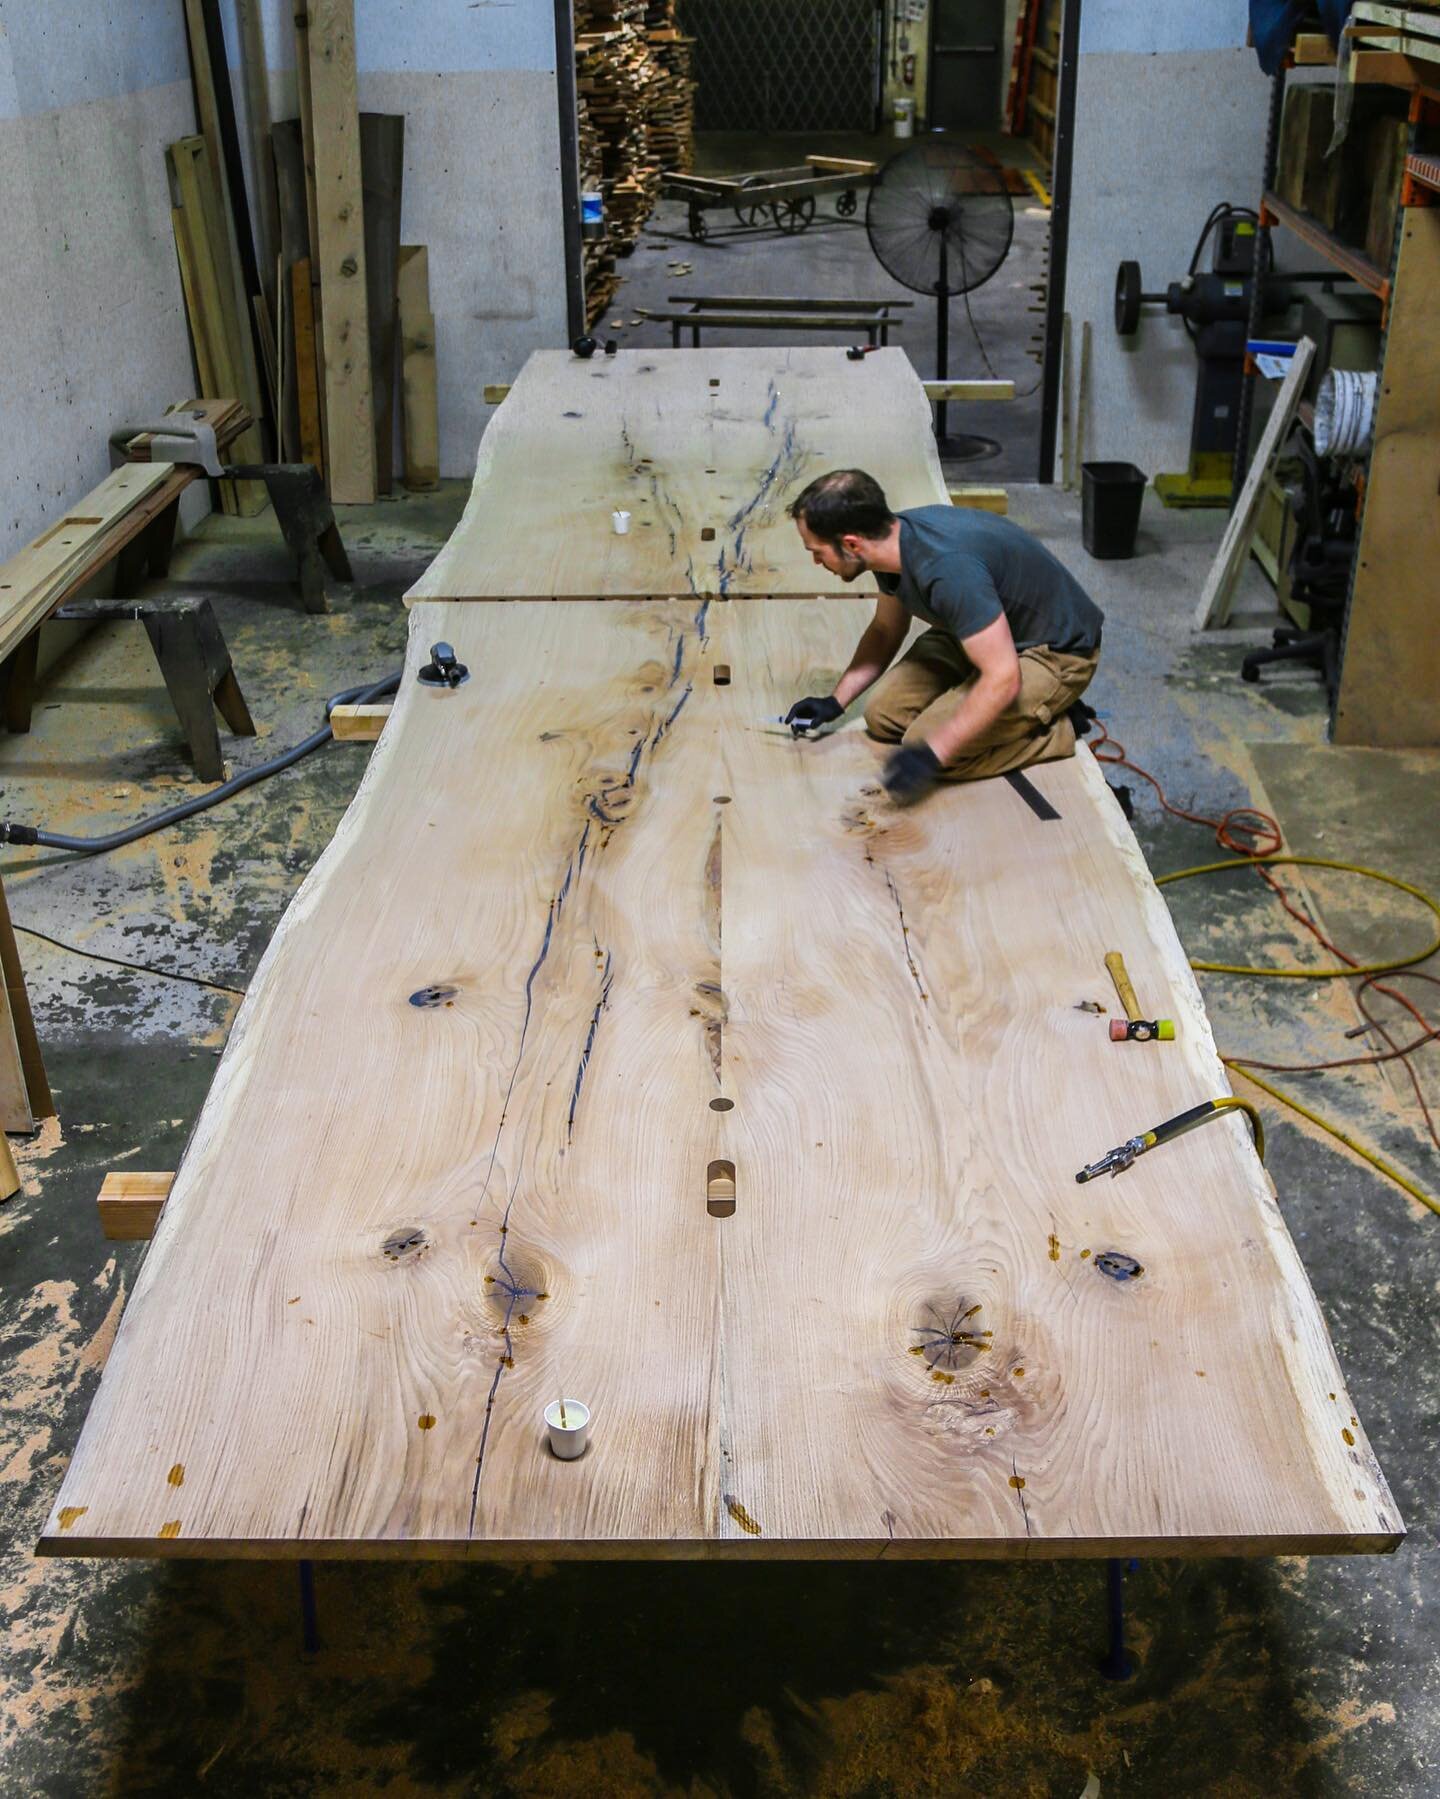 Nick has been diligently working on this new 25ft conference table in reclaimed Oak, and his attention to detail is remarkable. 🏆
We salvaged this tree back in 2016 from a historic site in Sumner, WA - This heritage Oak grew to be one of the largest